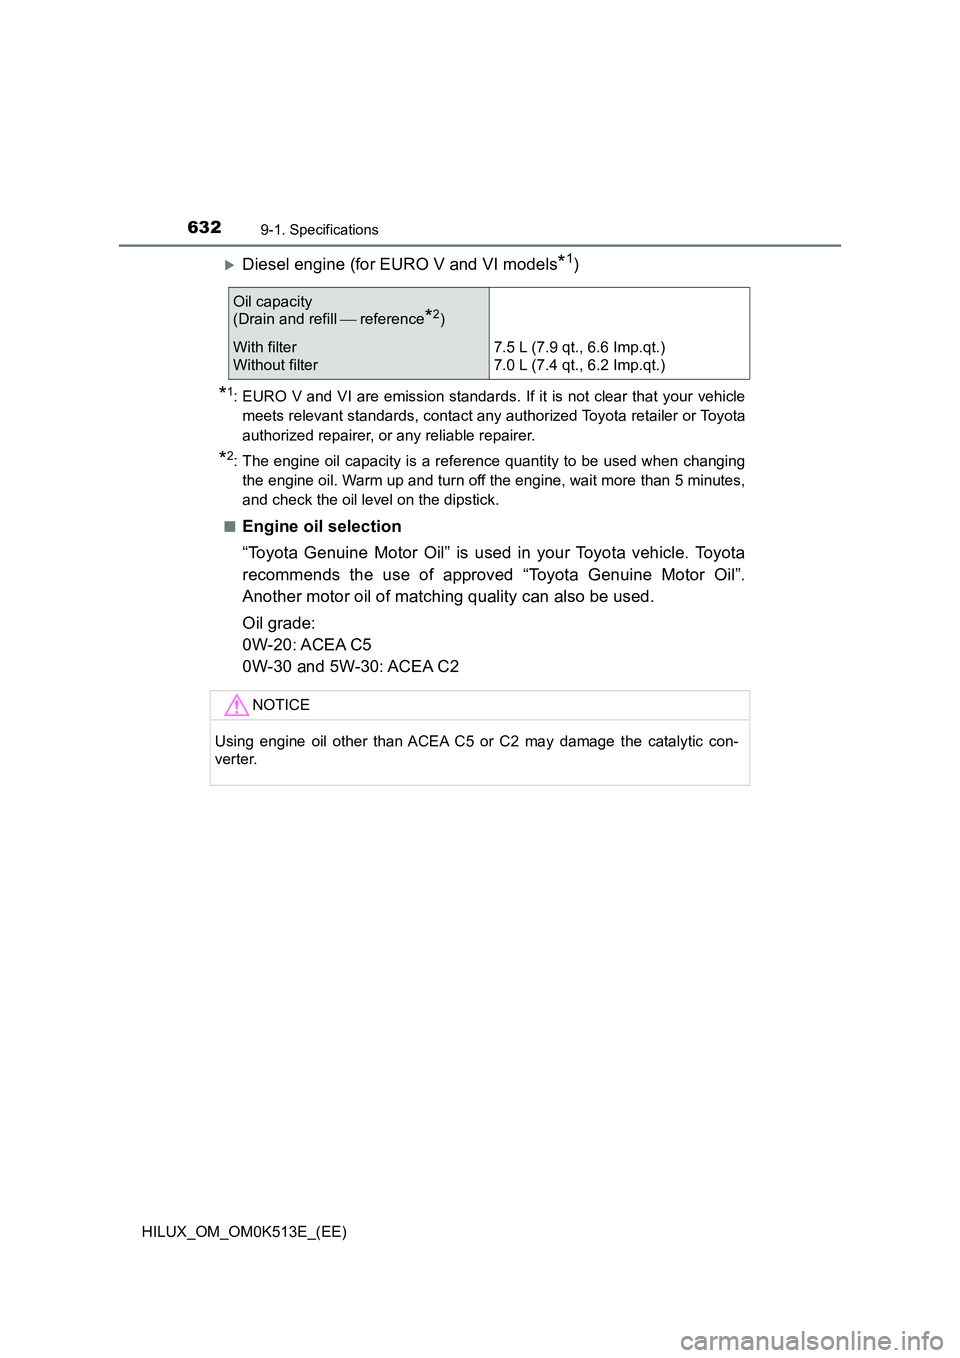 TOYOTA HILUX 2021  Owners Manual (in English) 6329-1. Specifications
HILUX_OM_OM0K513E_(EE)
Diesel engine (for EURO V and VI models*1)
*1: EURO V and VI are emission standards. If it is not clear that your vehicle 
meets relevant standards, co